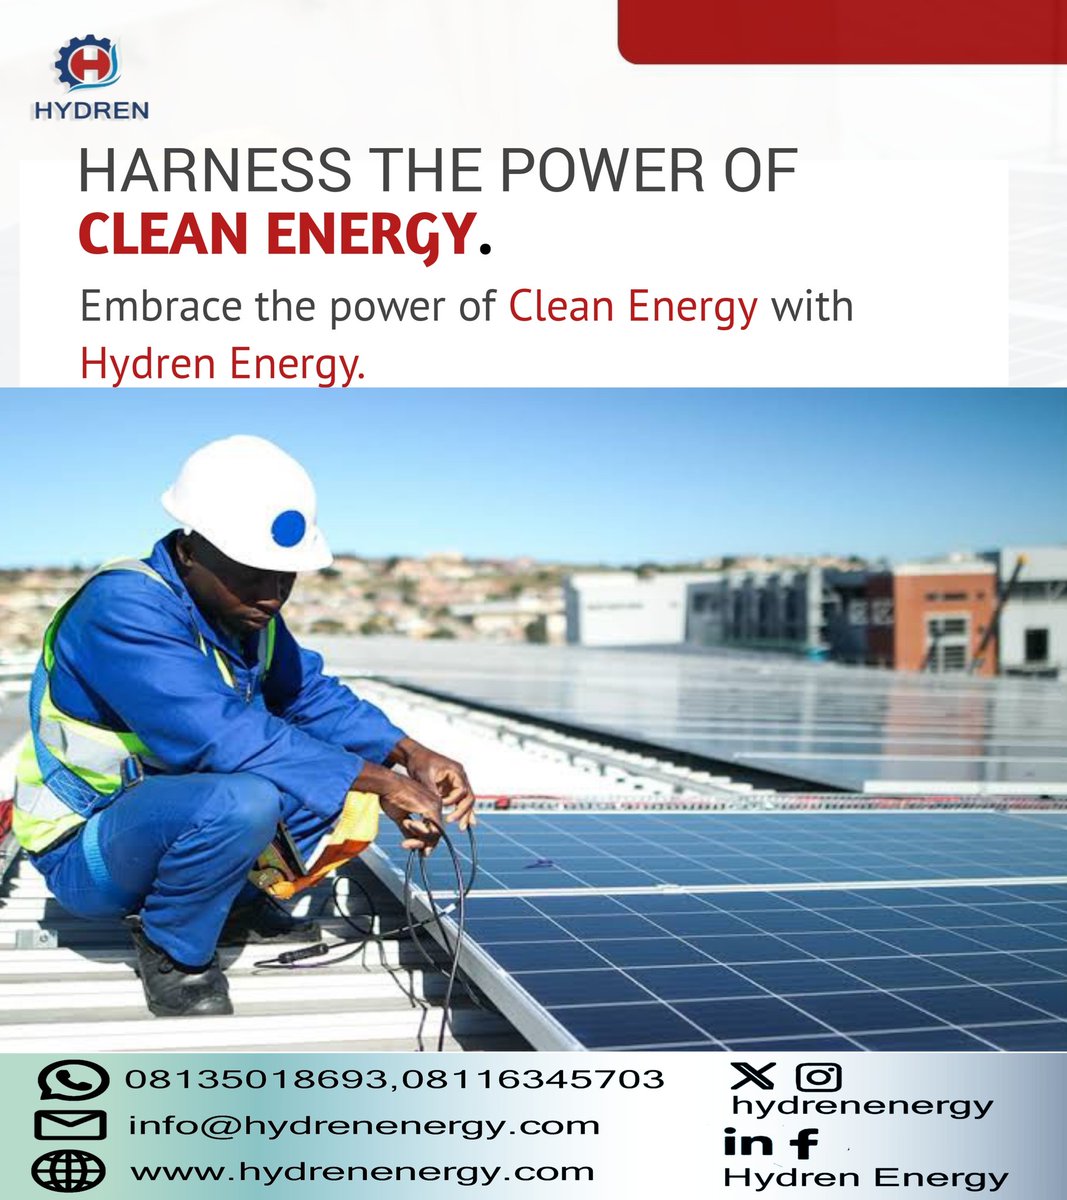 Harness the Power of Clean Energy with Hydren Energy. Save your money while you save the environment. 
#saveenergy #solarpower #solarsystem #solarenergy